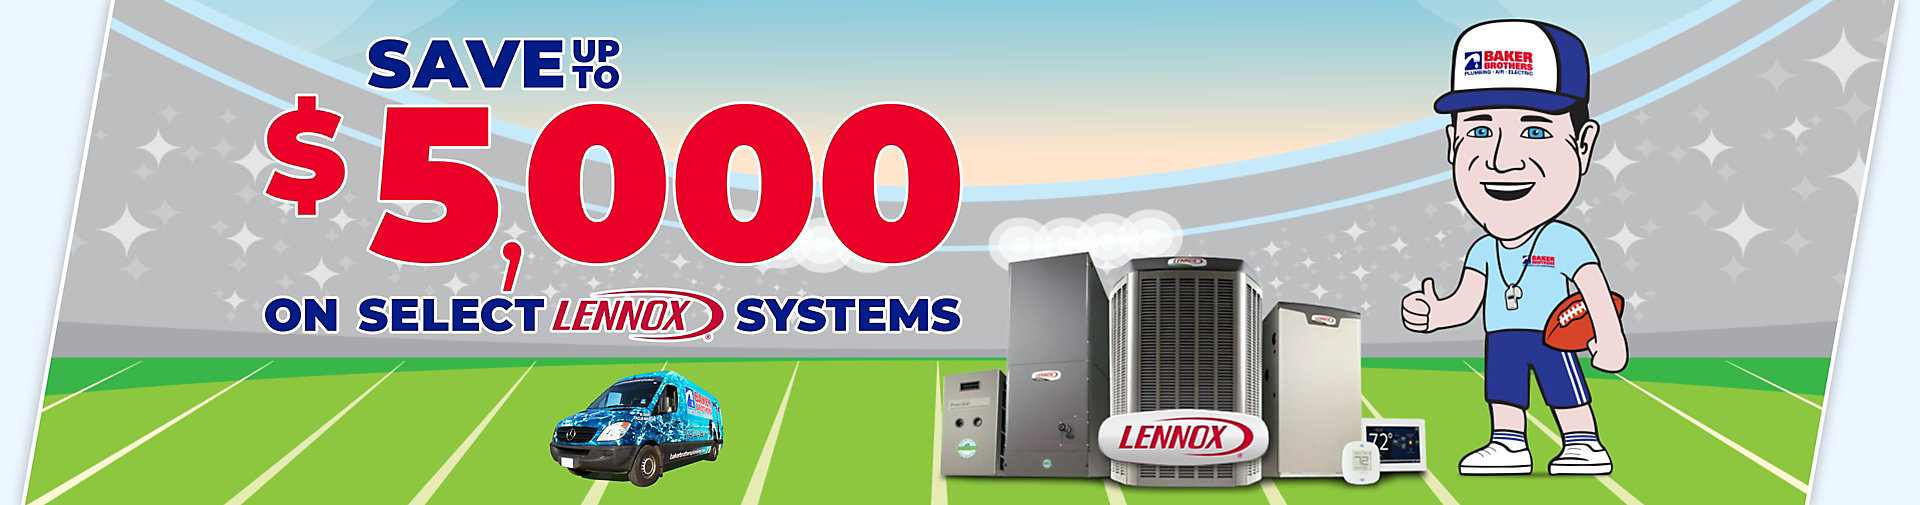 Get Up To $5,000 Off Select Lennox Systems